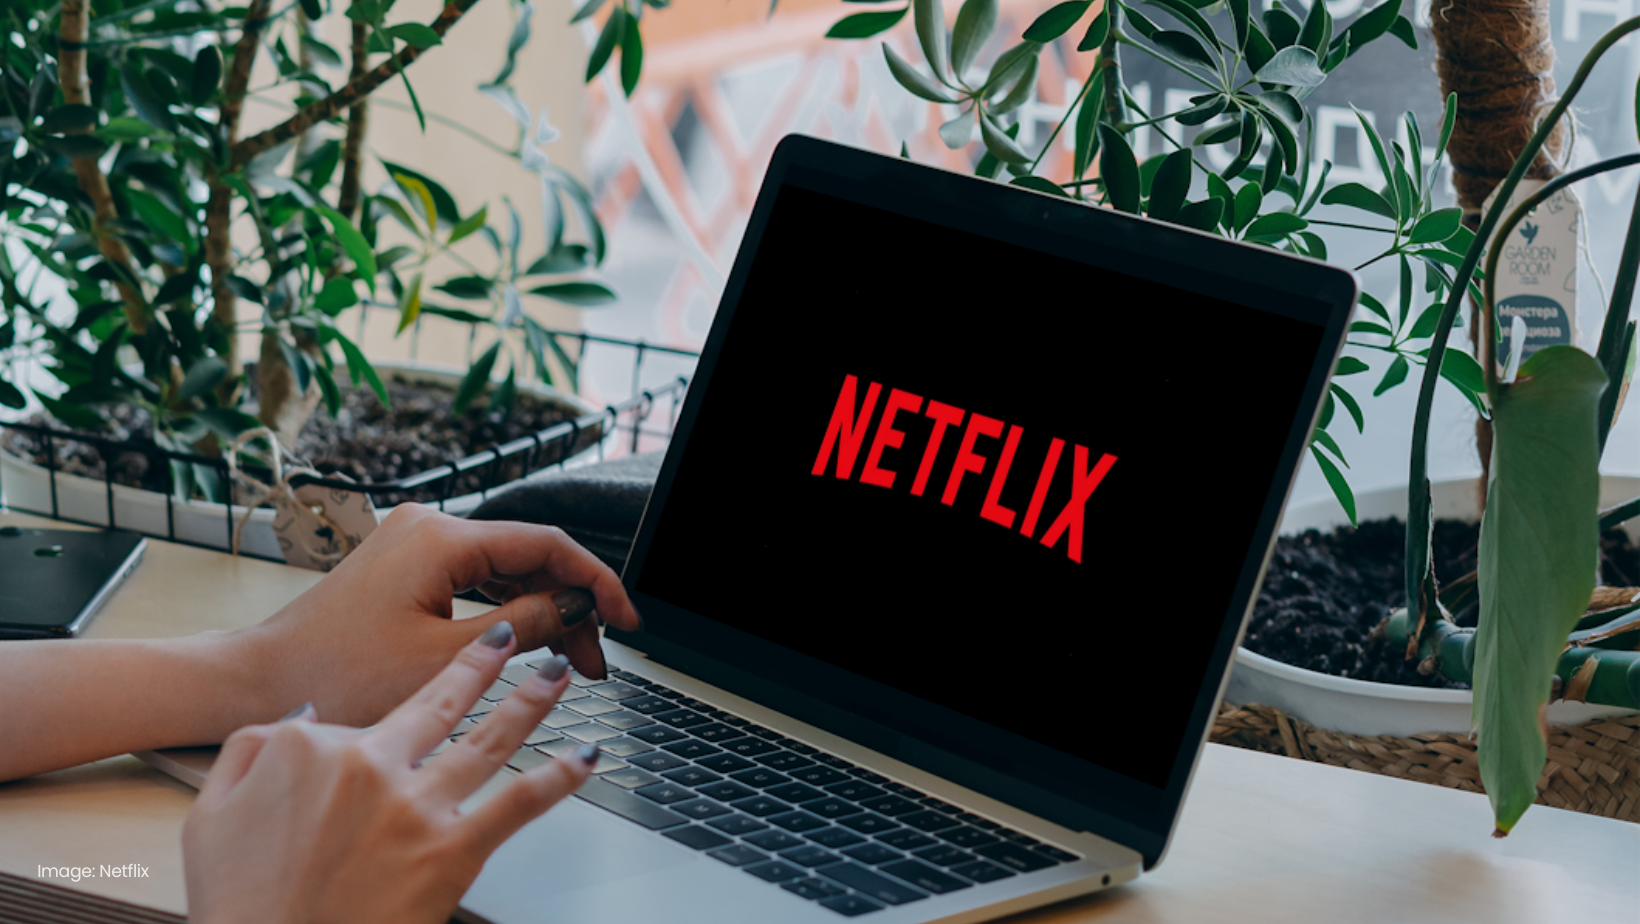 Netflix See Themselves as a Professional Sports Team For Performance, Not Unconditional Love